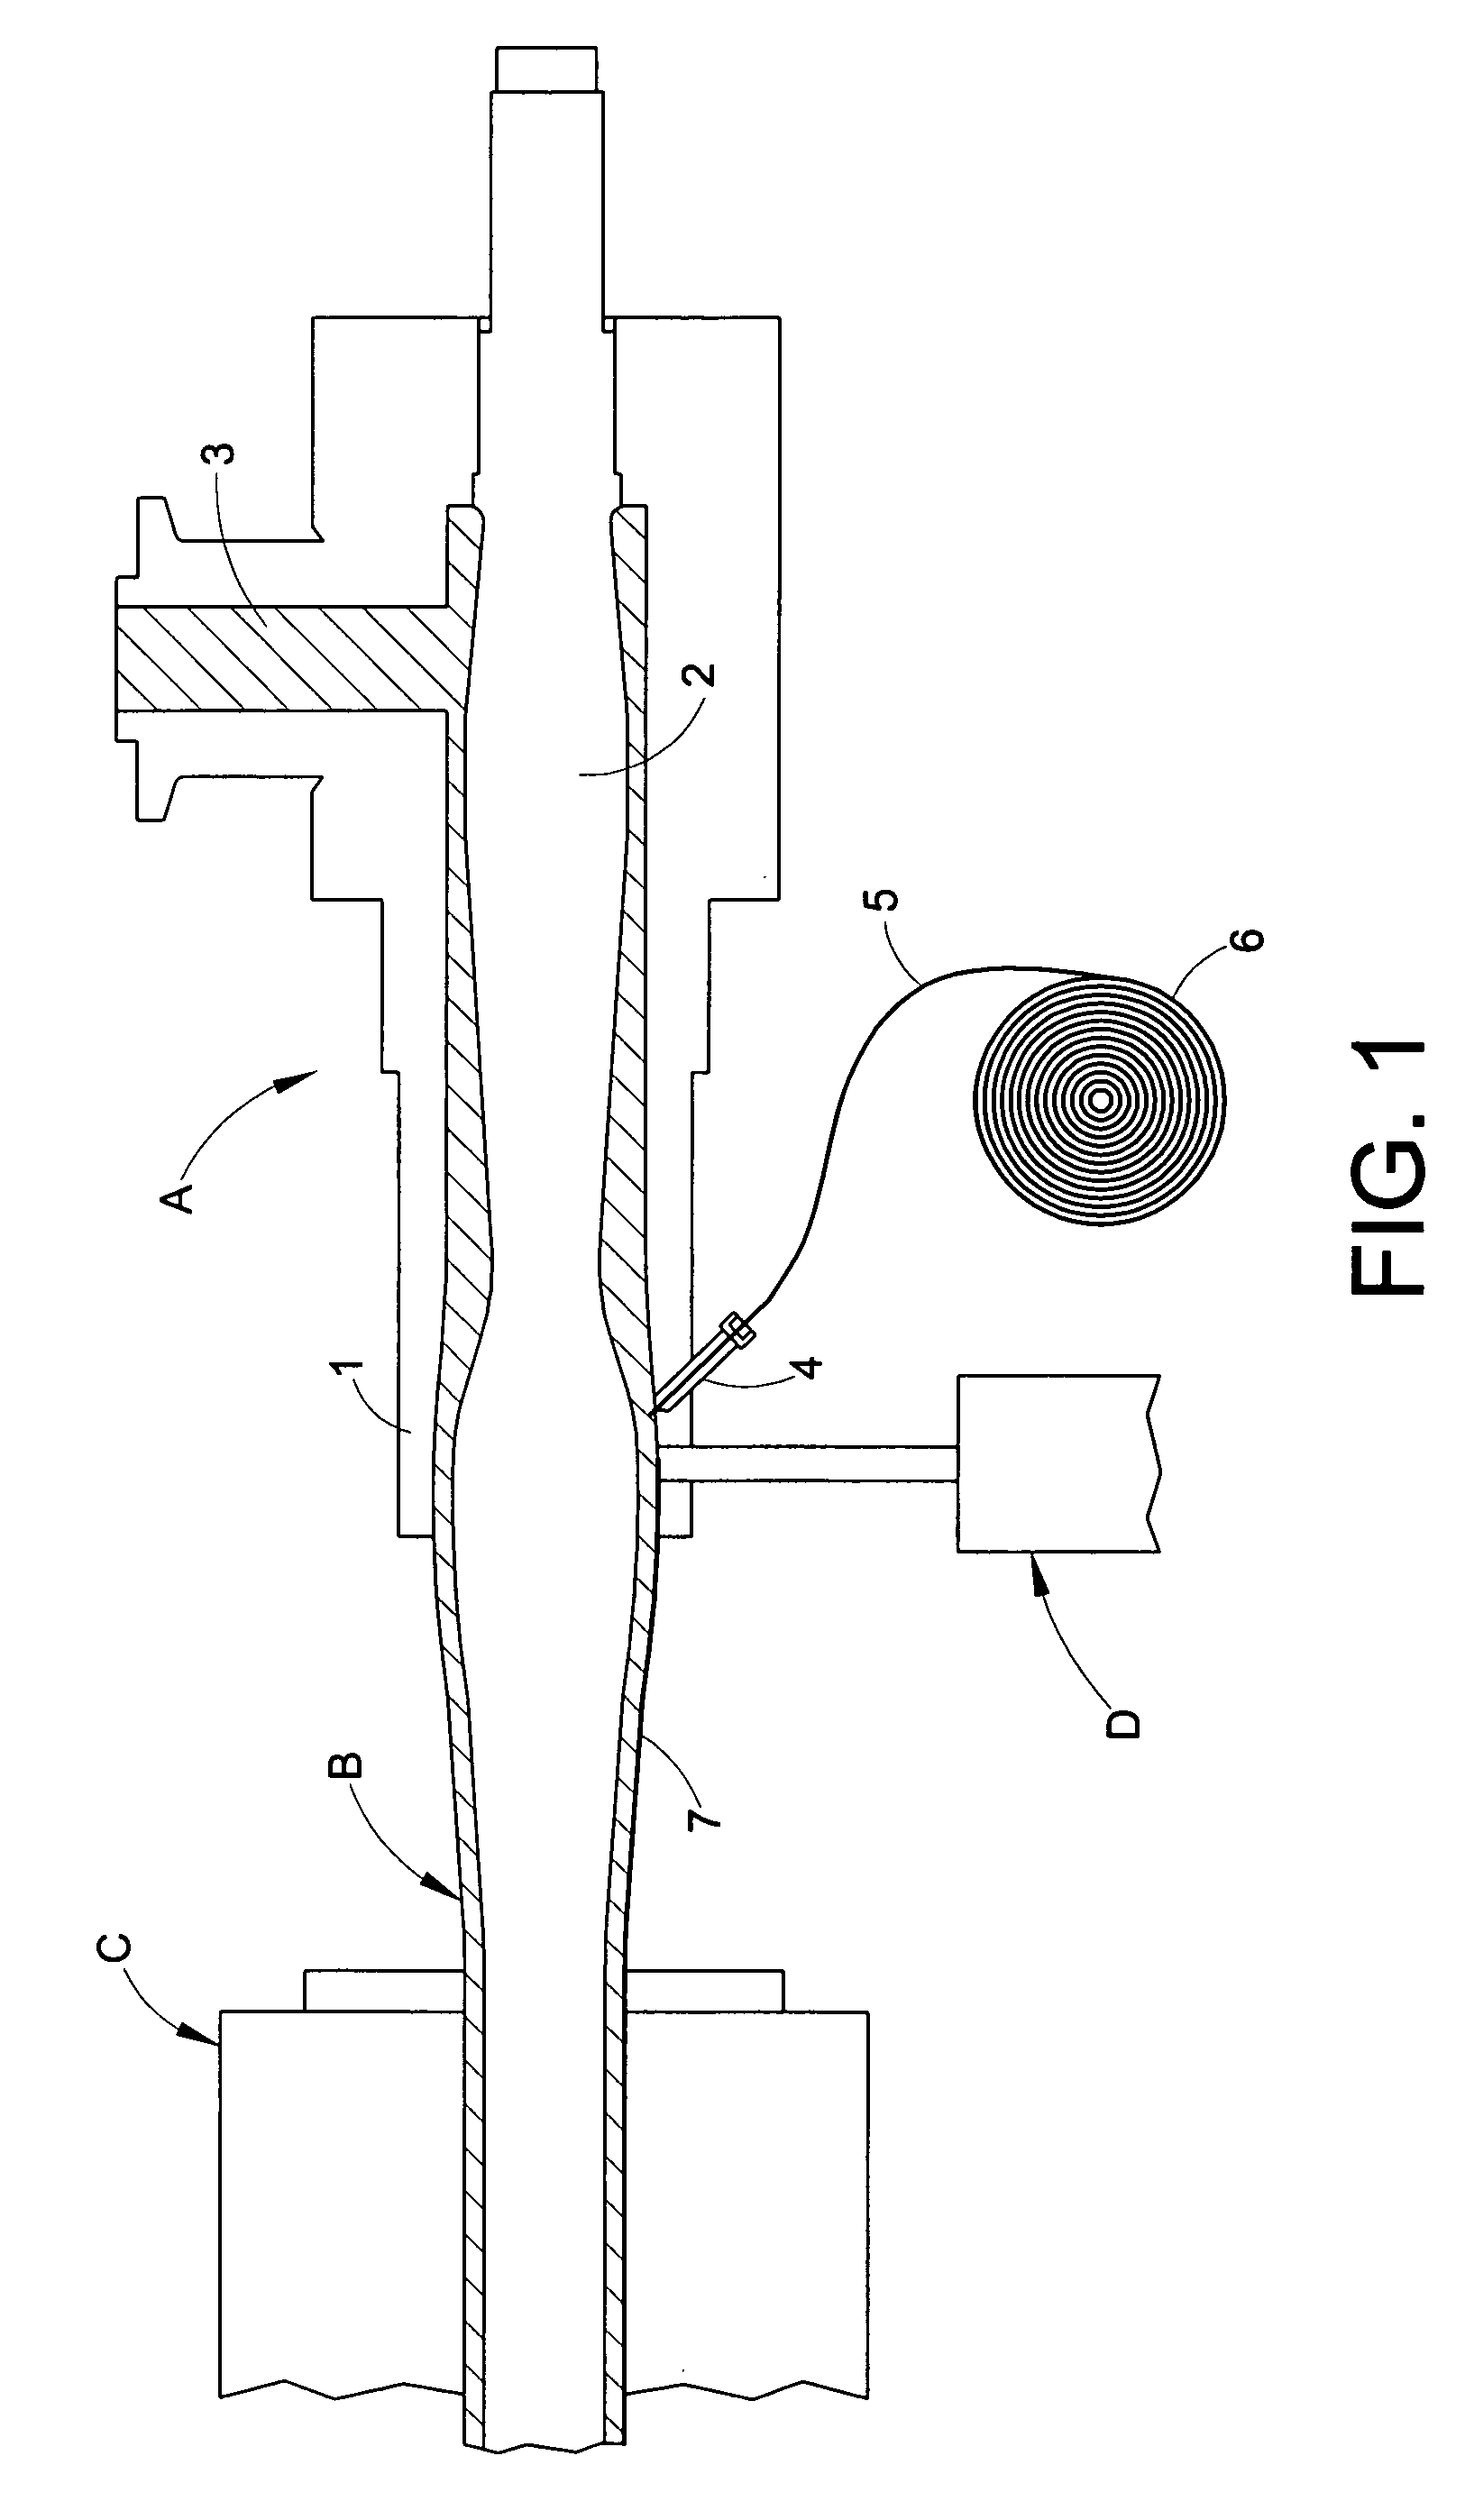 Duct with wire locator